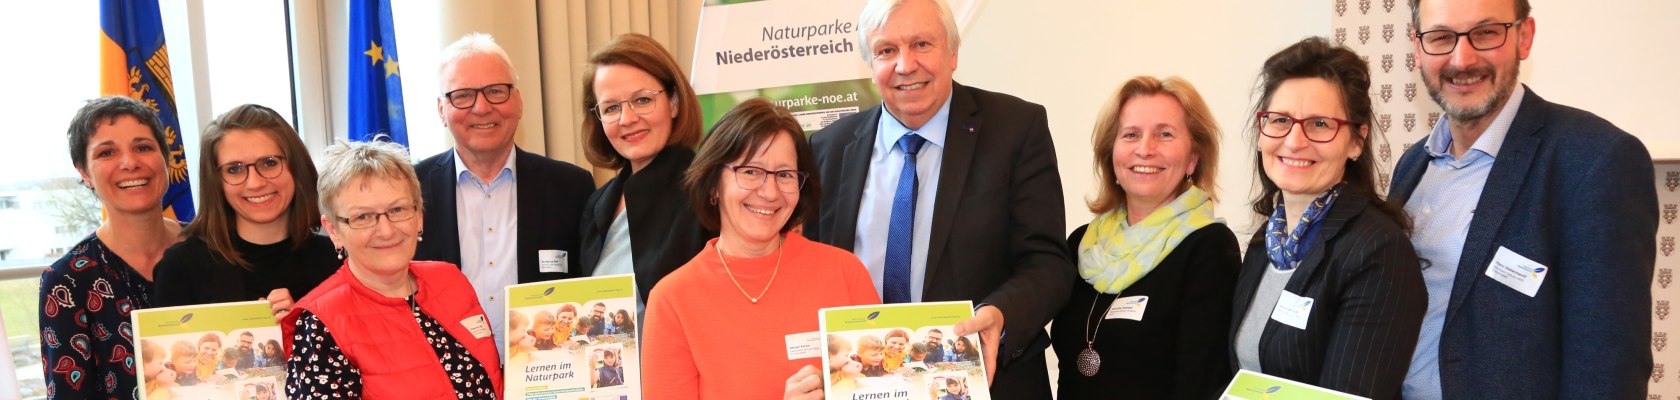 Handover of the school folders to the nature park schools by LR Mag. Teschl-Hofmeister, Mr. Heuras, Director of Education and Mr. Wolfgang Mair, President of Nature Parks Austria., © Naturparke Noe-Hebenstreit